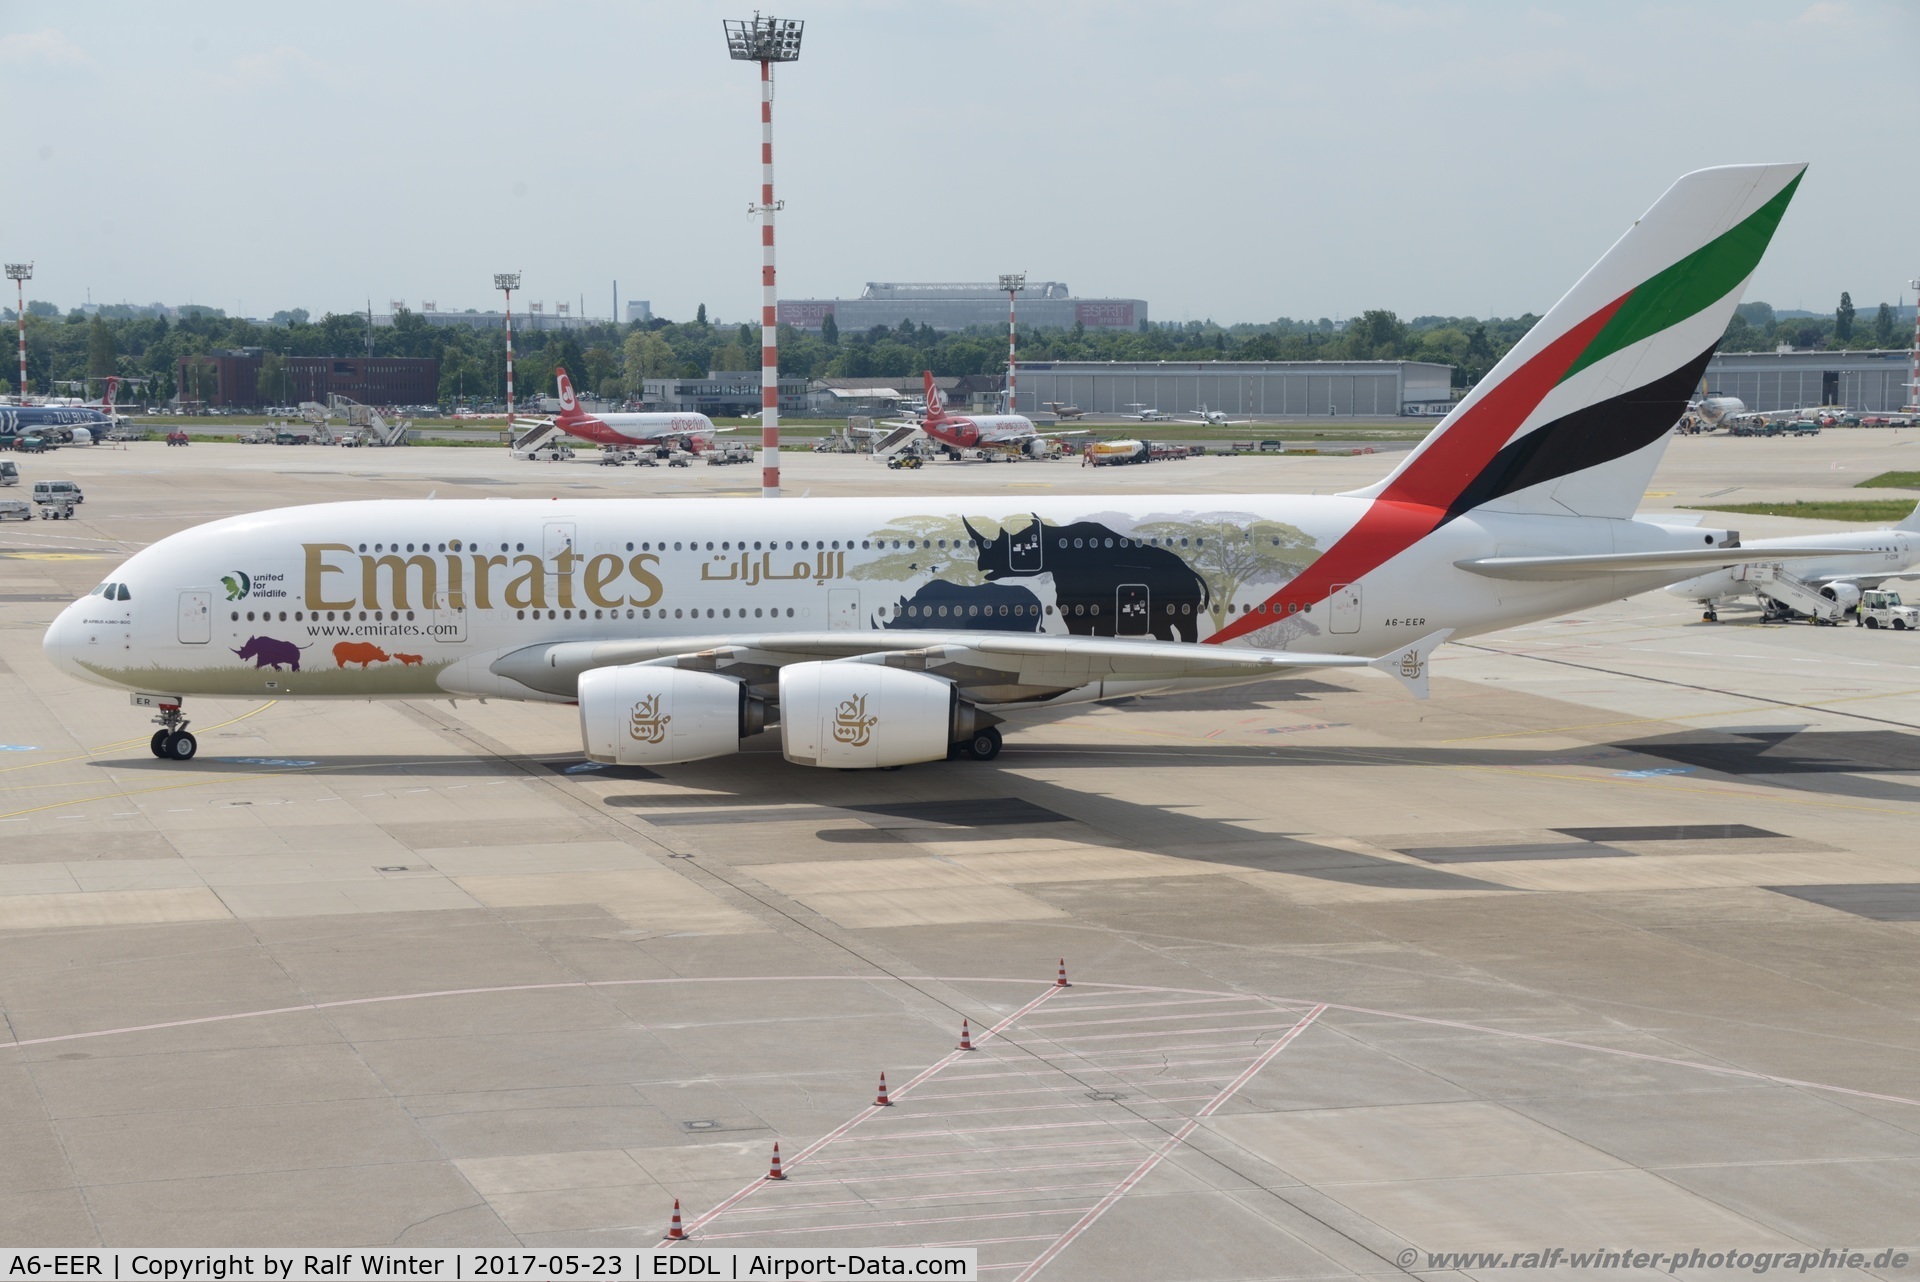 A6-EER, 2013 Airbus A380-861 C/N 139, Airbus A380-861 - Emirates 'United for wildlife' - 139 - A6-EER - 23.04.2017 - DUS